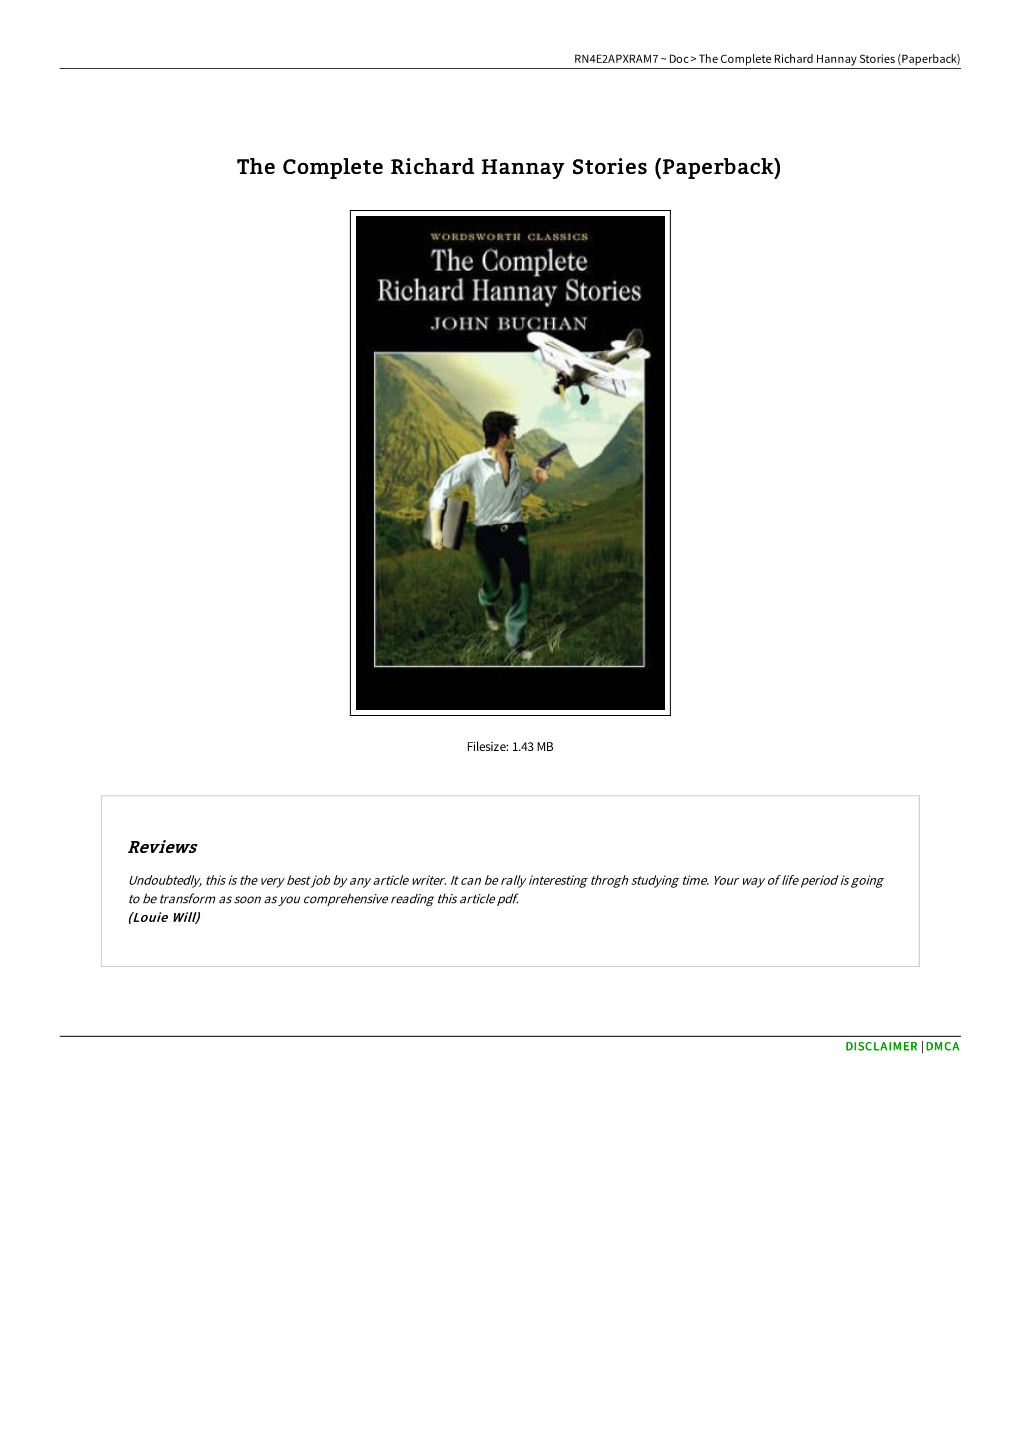 Download Ebook » the Complete Richard Hannay Stories